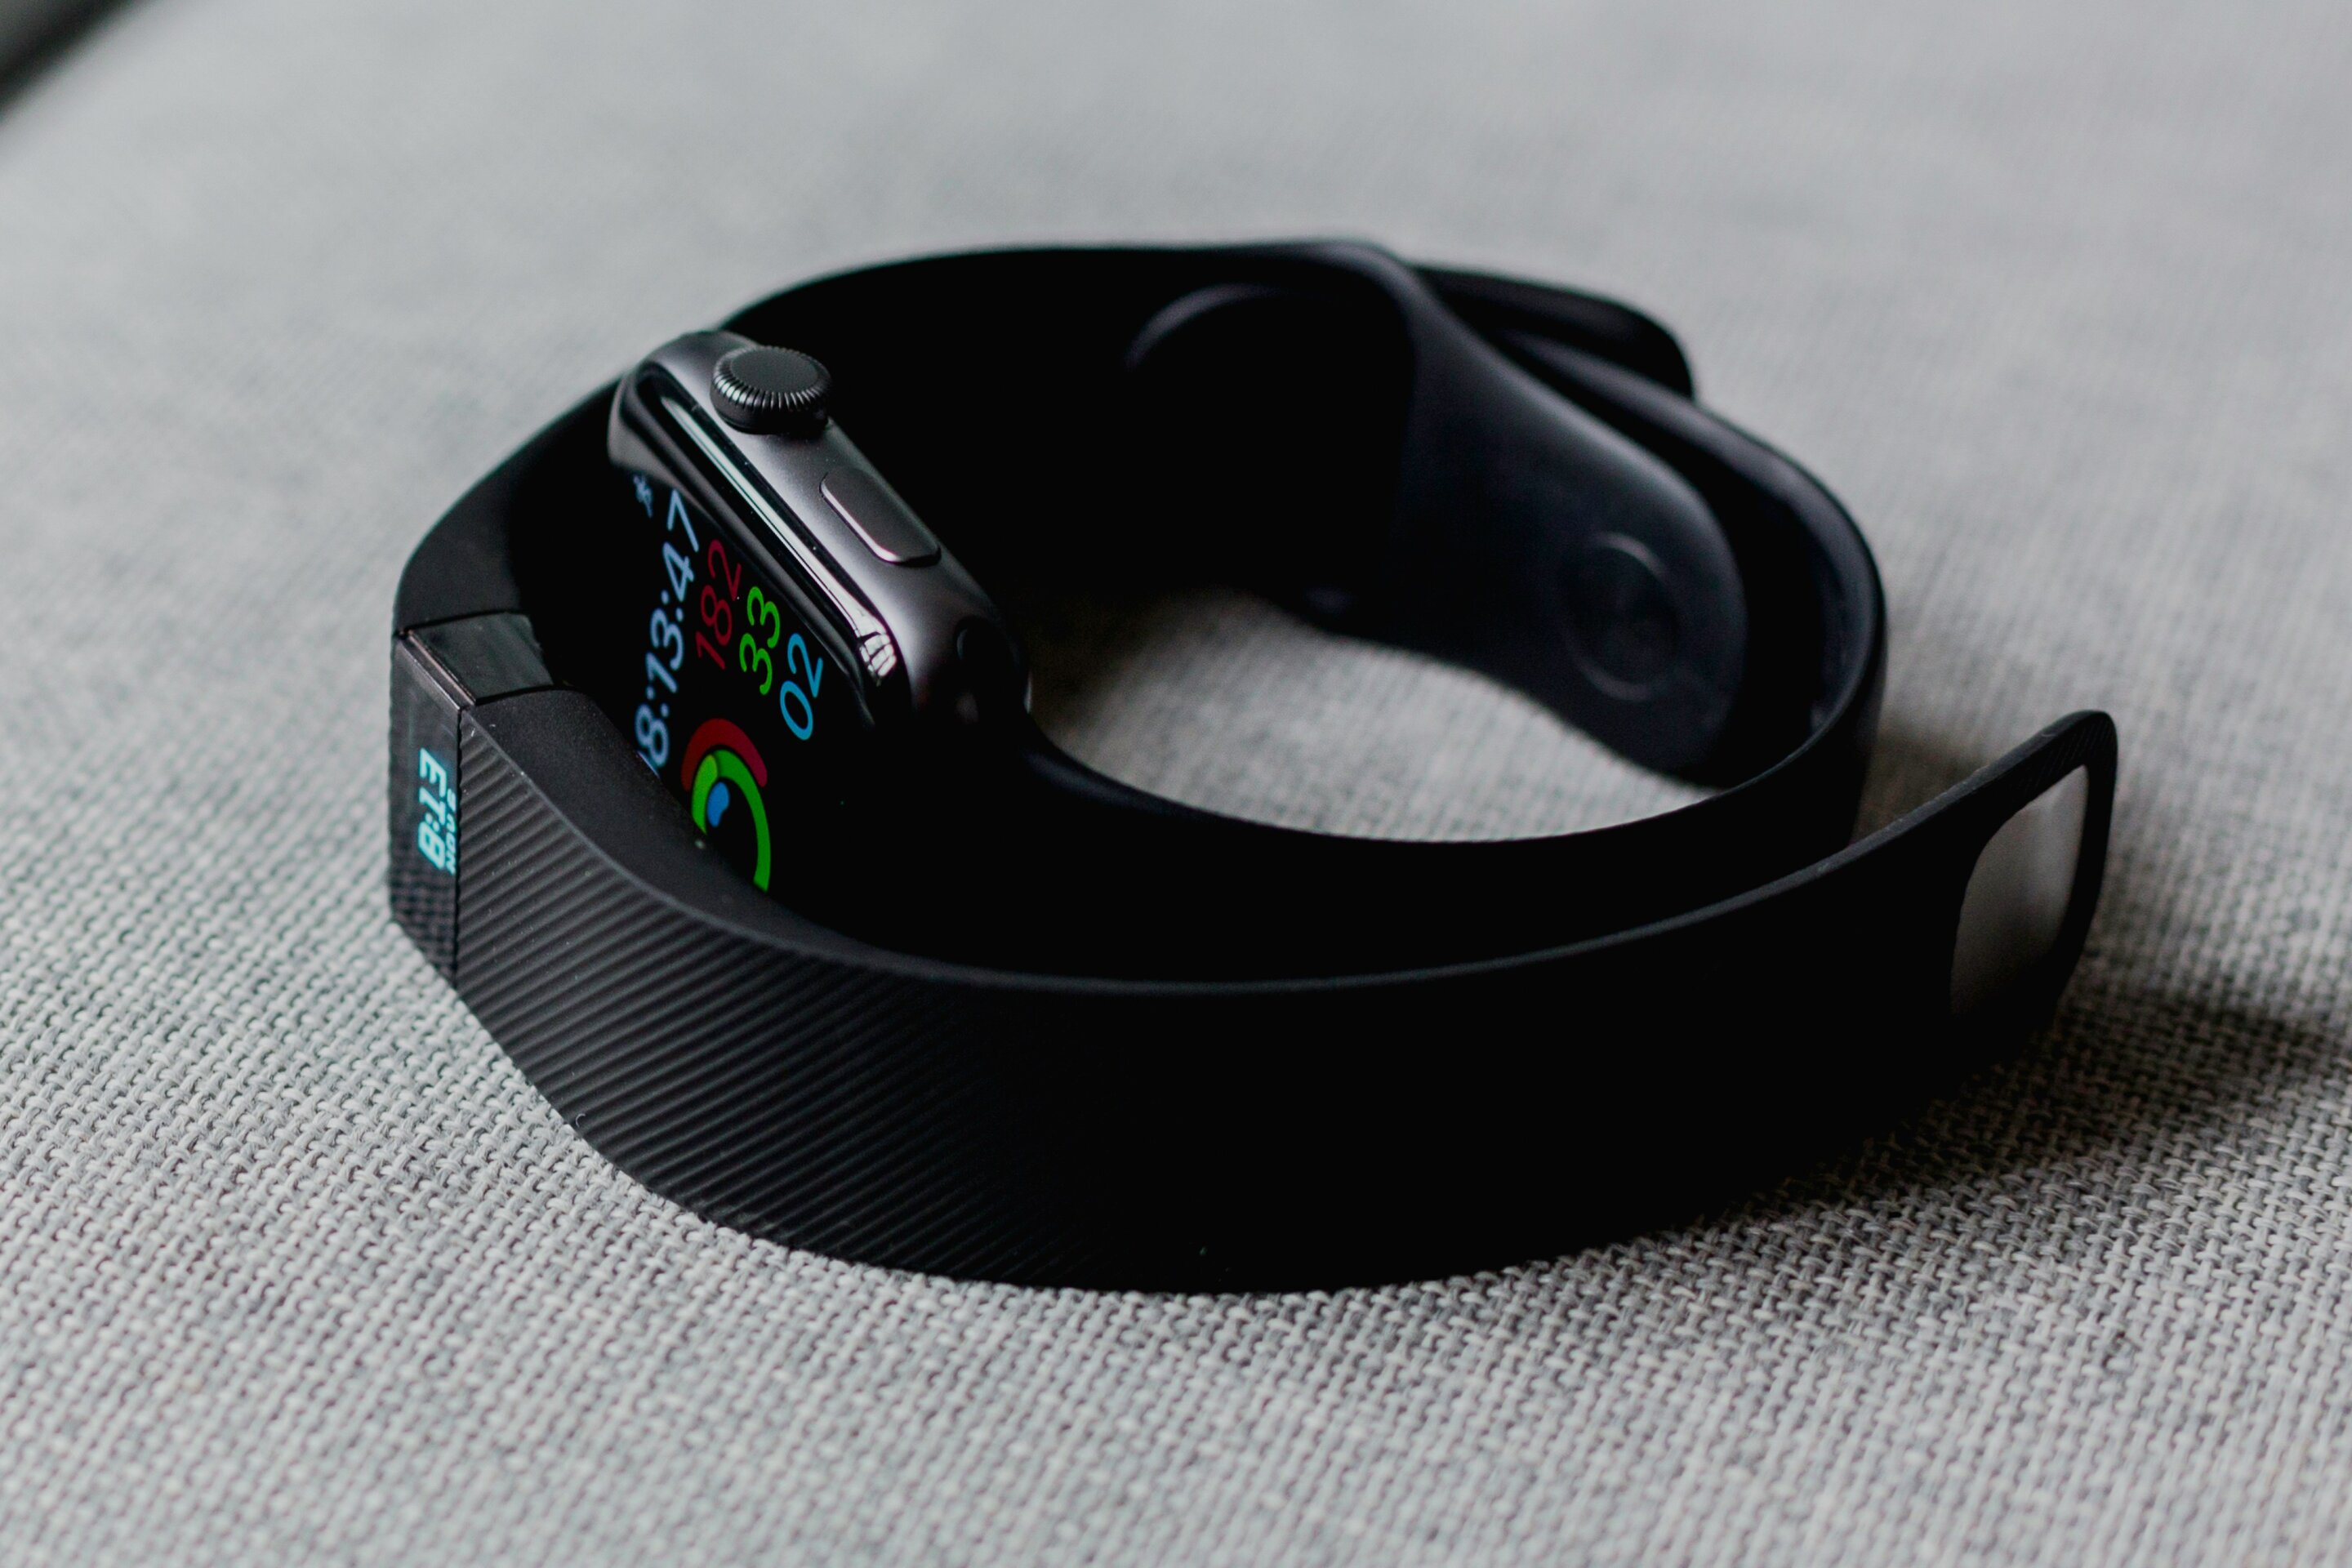 #Wearable tech made easier with personalized support